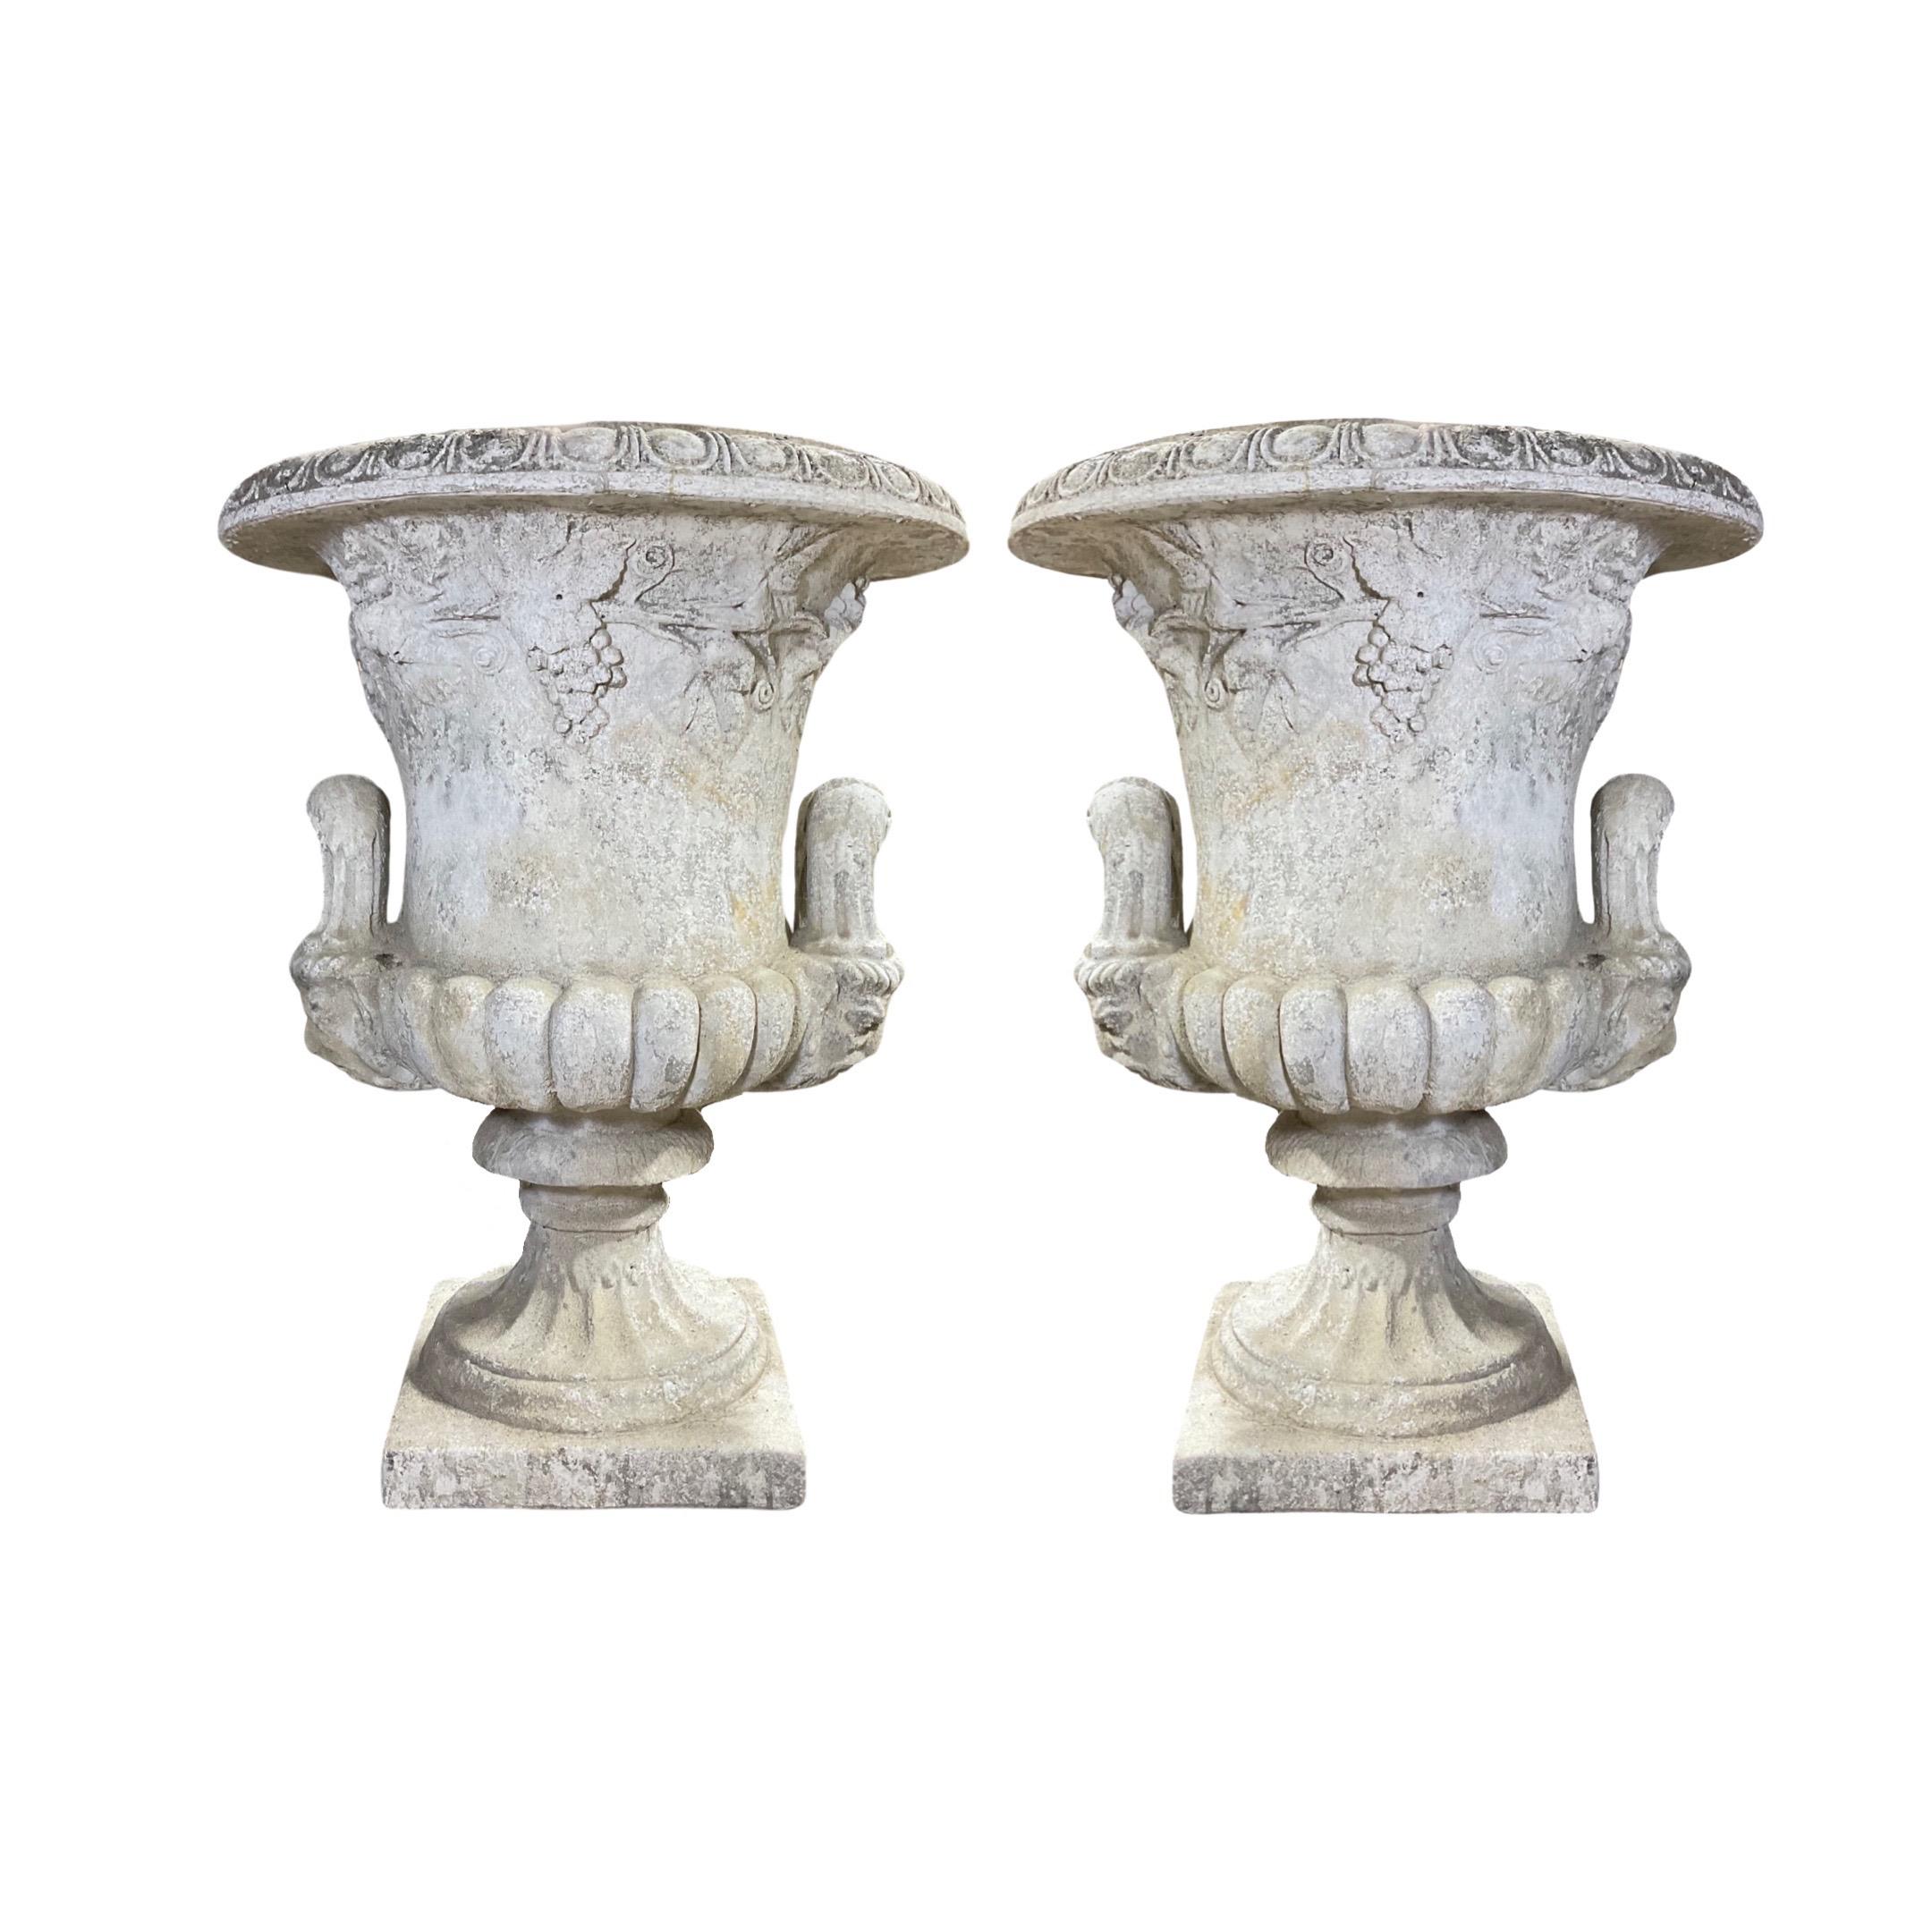 These 19th-century, Medici-style French planters are the perfect addition to your outdoor space. Expertly crafted from a durable composite mix, this pair of planters adds a classic and timeless look to your decor. With a pair of two, you'll be able